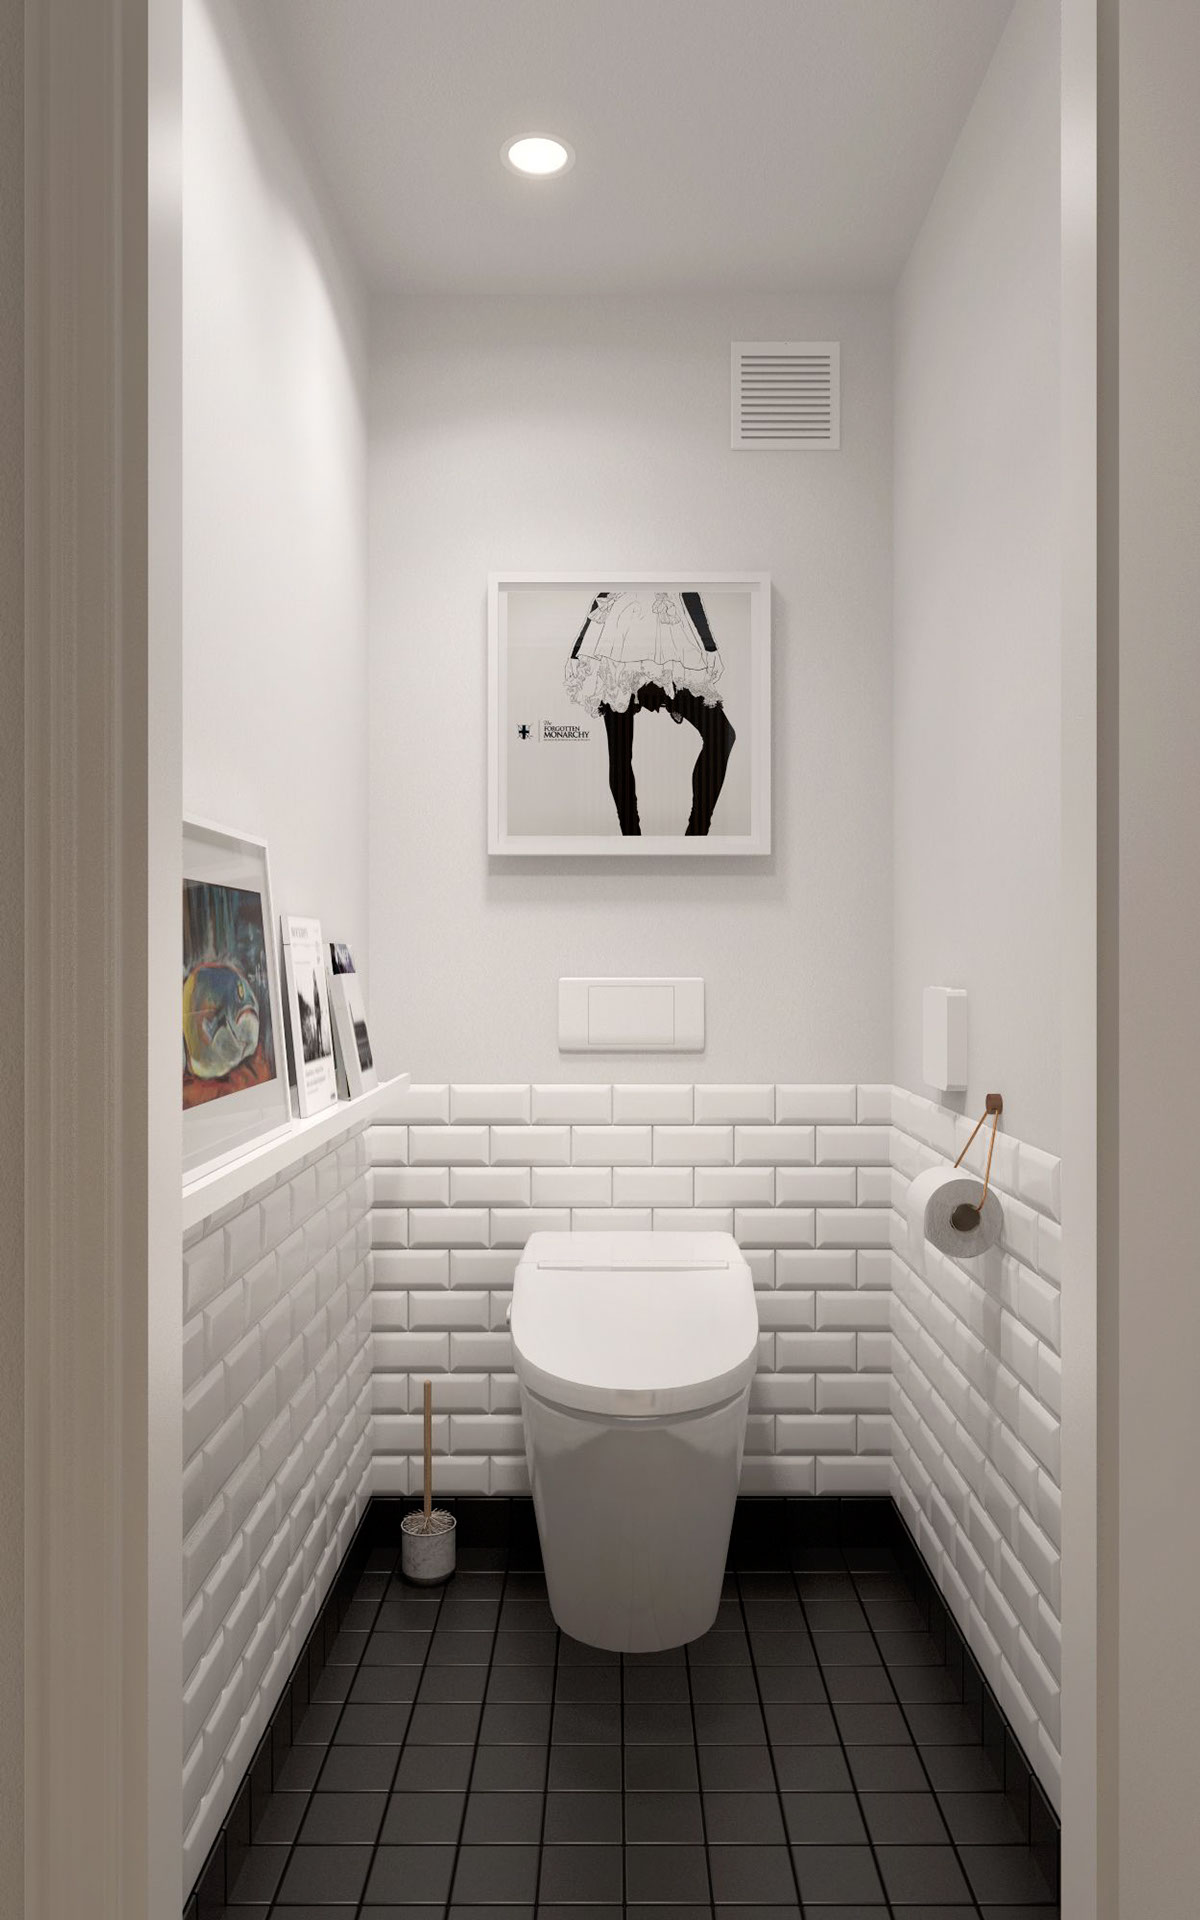 Ideas for bathroom design "width =" 1200 "height =" 1920 "srcset =" https://mileray.com/wp-content/uploads/2020/05/1588516447_172_Scandinavian-Bathroom-Design-Ideas-With-White-Color-Shade-Which-Can.jpg 1200w , https://mileray.com/wp-content/uploads/2016/09/black-and-white-bathroom-INT2-Architecture-188x300.jpg 188w, https://mileray.com/wp-content/uploads/ 2016 /09/black-and-white-bathroom-INT2-Architecture-768x1229.jpg 768w, https://mileray.com/wp-content/uploads/2016/09/black-and-white-bathroom-INT2-Architecture - 640x1024.jpg 640w, https://mileray.com/wp-content/uploads/2016/09/black-and-white-bathroom-INT2-Architecture-696x1114.jpg 696w, https://mileray.com/wp - content / uploads / 2016/09 / black-white-bathroom-INT2-architecture-1068x1709.jpg 1068w, https://mileray.com/wp-content/uploads/2016/09/black-and-white-bathroom - INT2-Architecture-263x420.jpg 263w "sizes =" (maximum width: 1200px) 100vw, 1200px